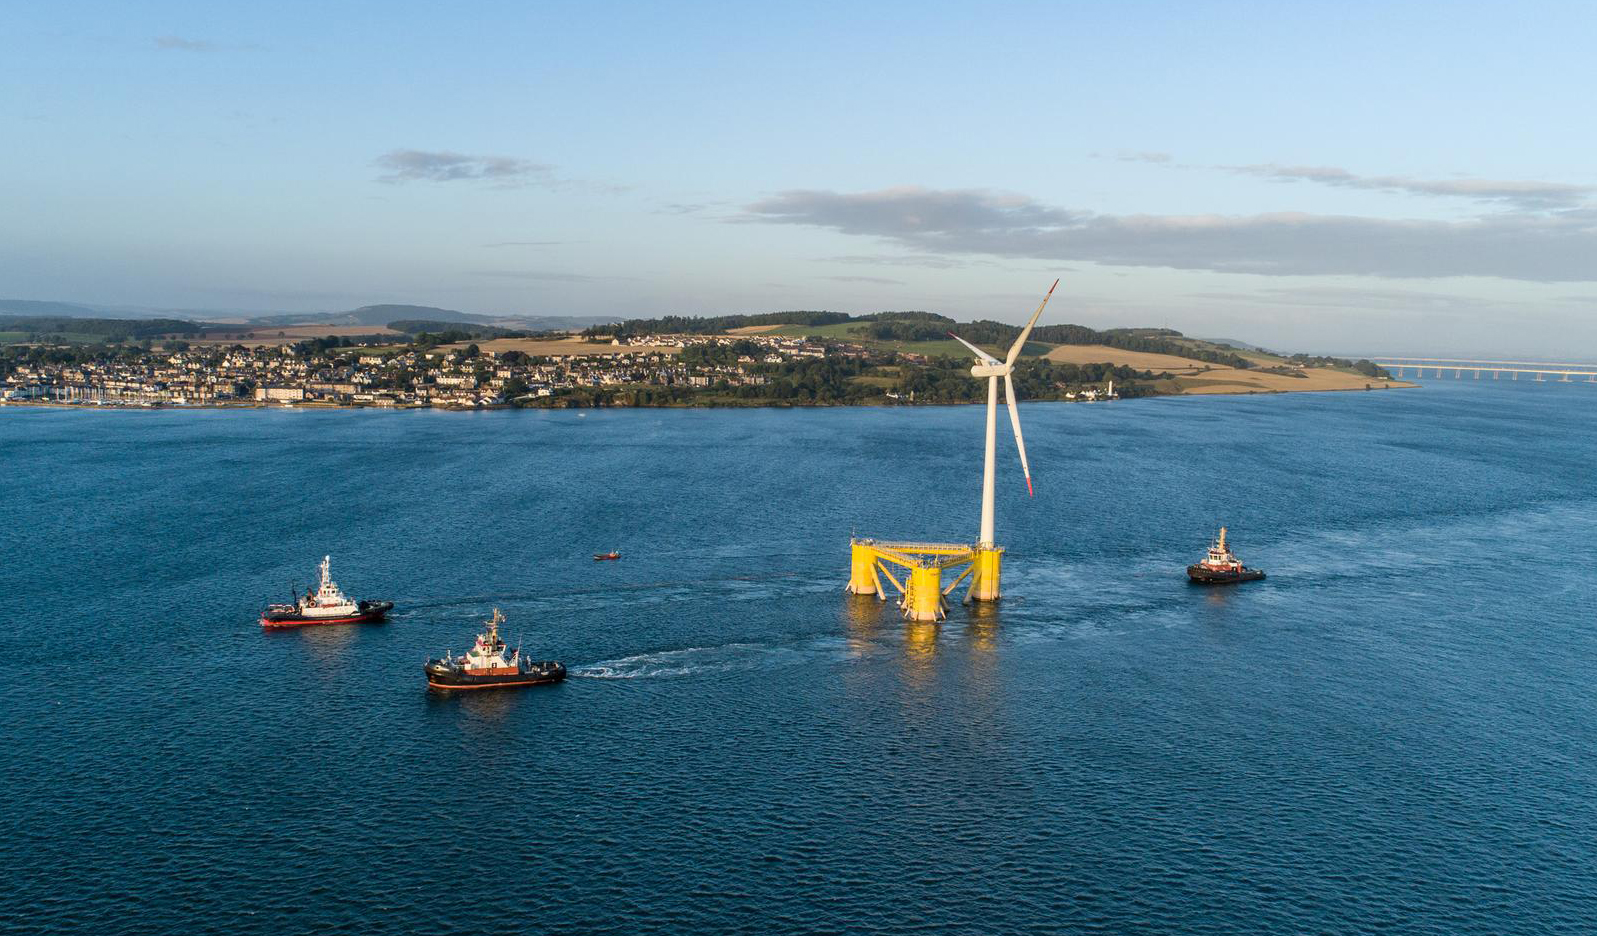 Offshore wind turbine and boats